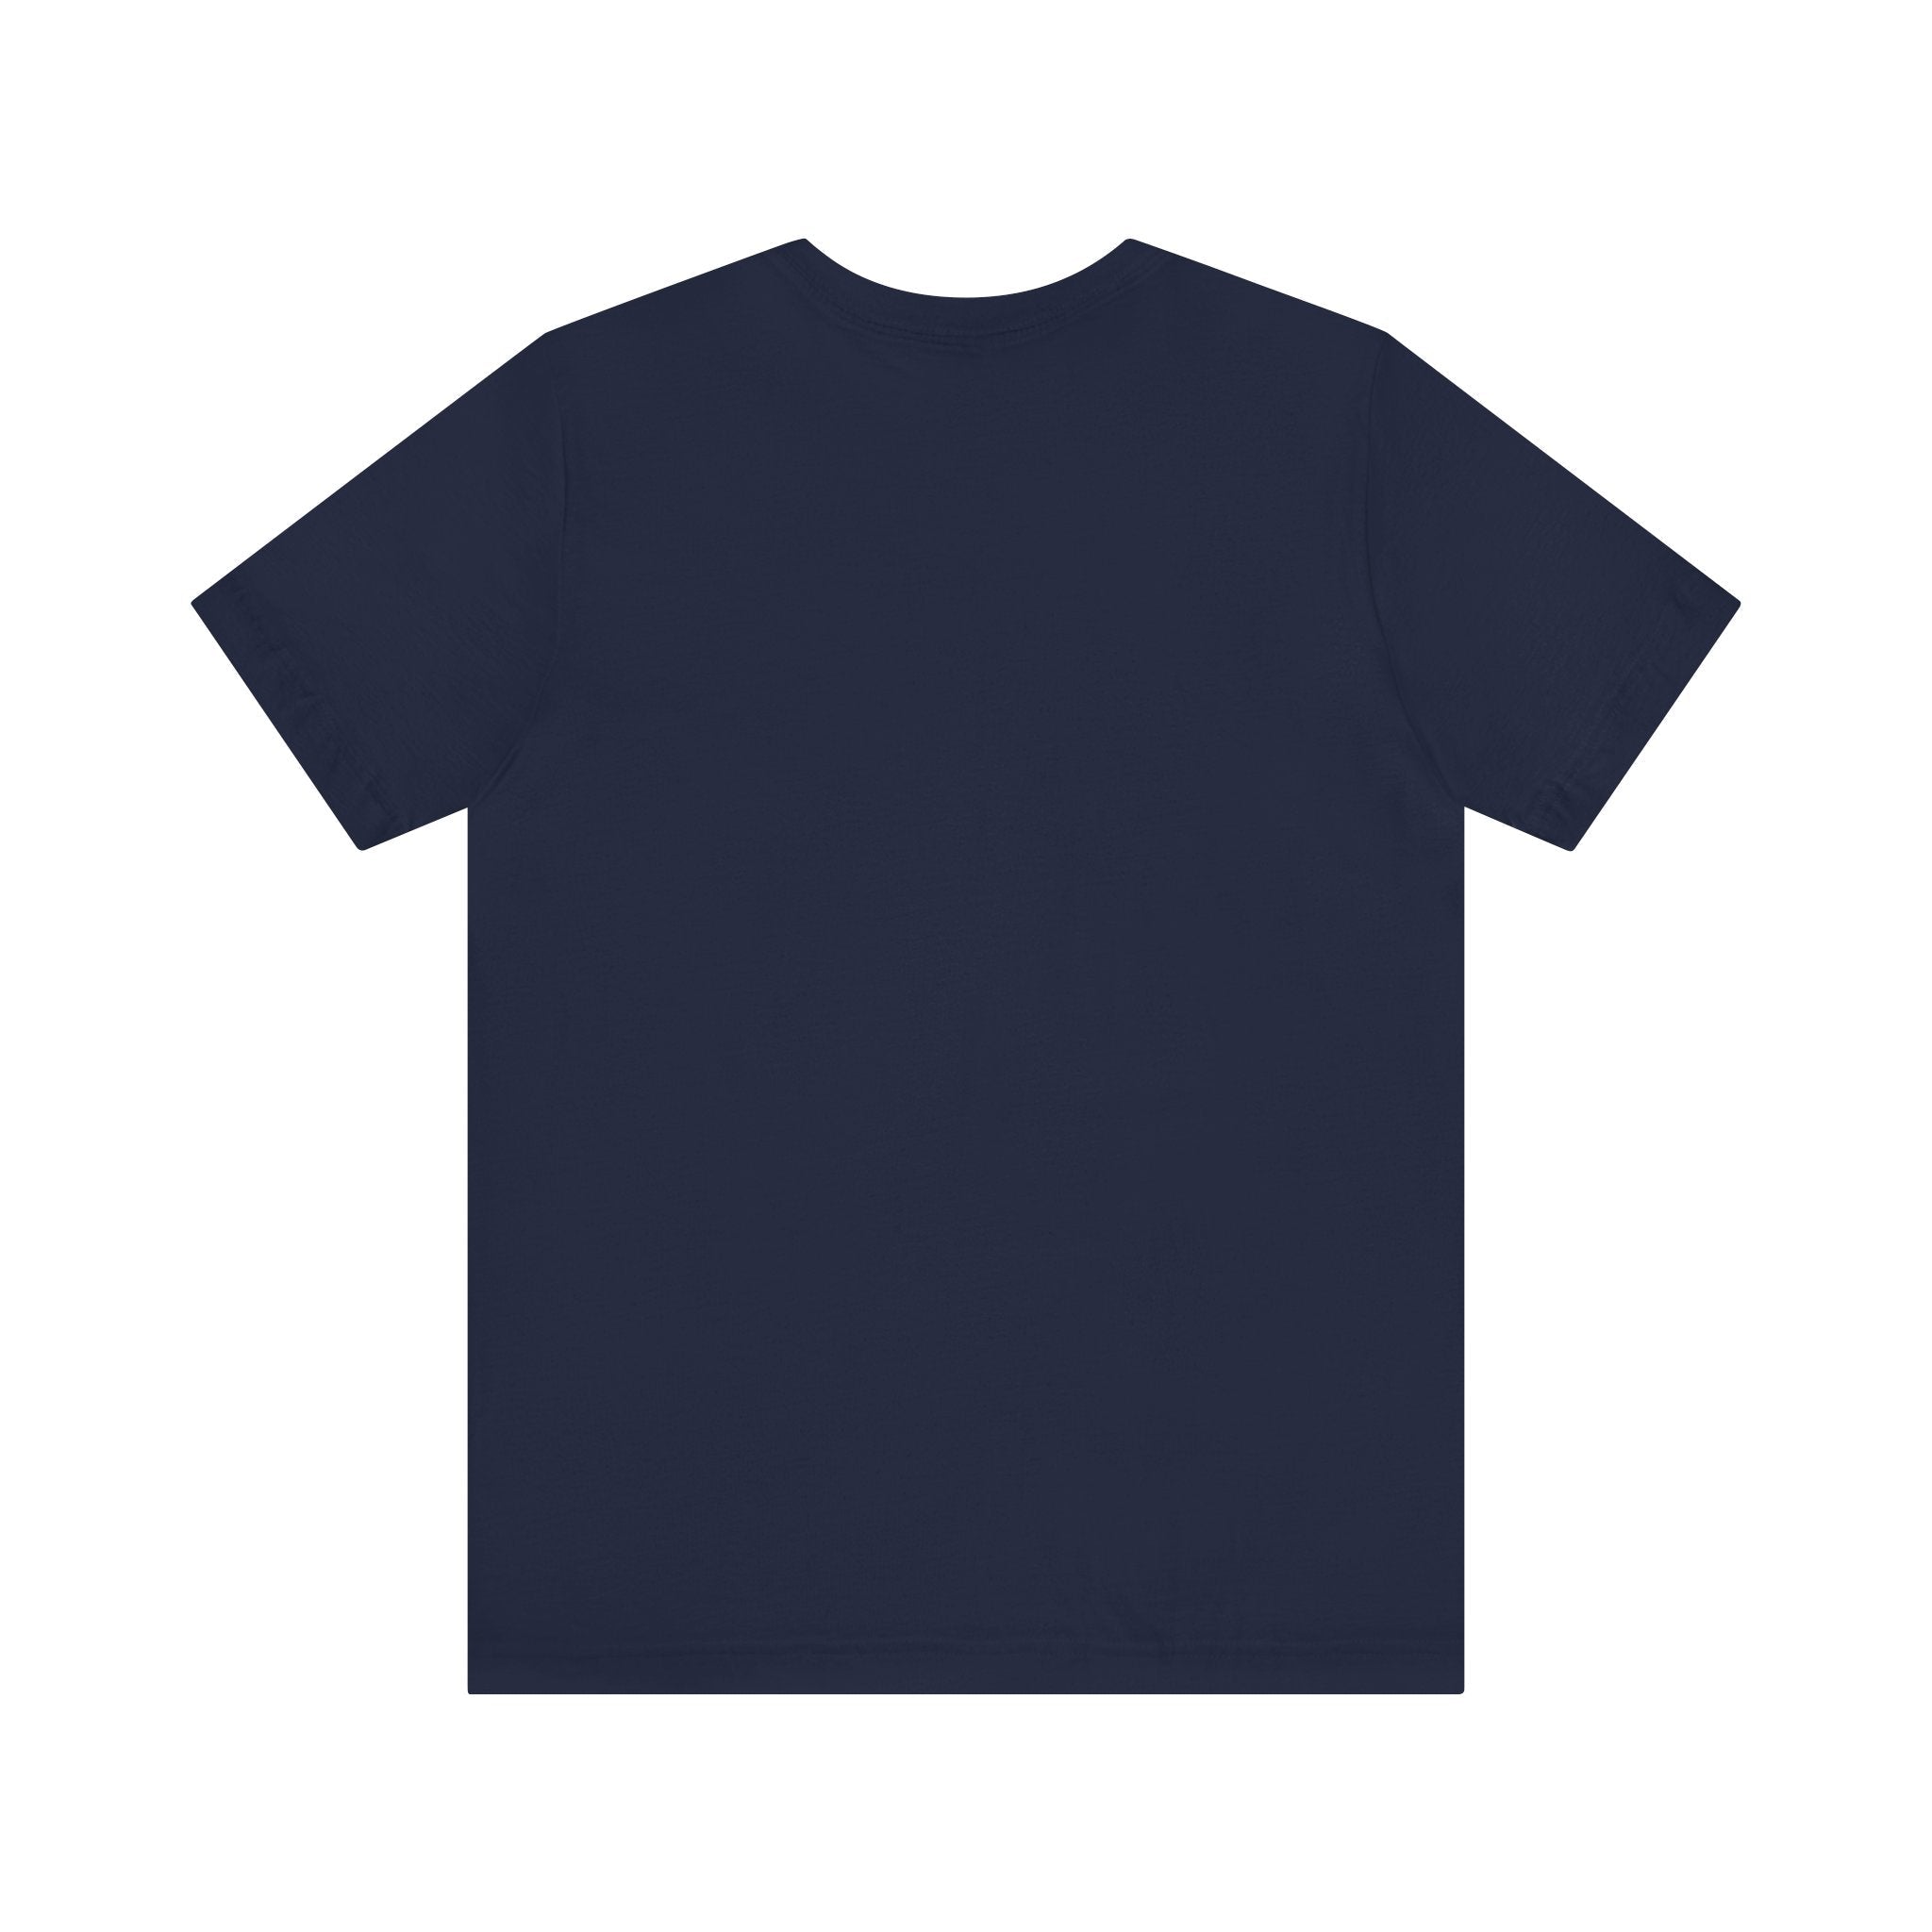 Bella & Canvas navy t shirt with white logo, direct-to-garment printed item